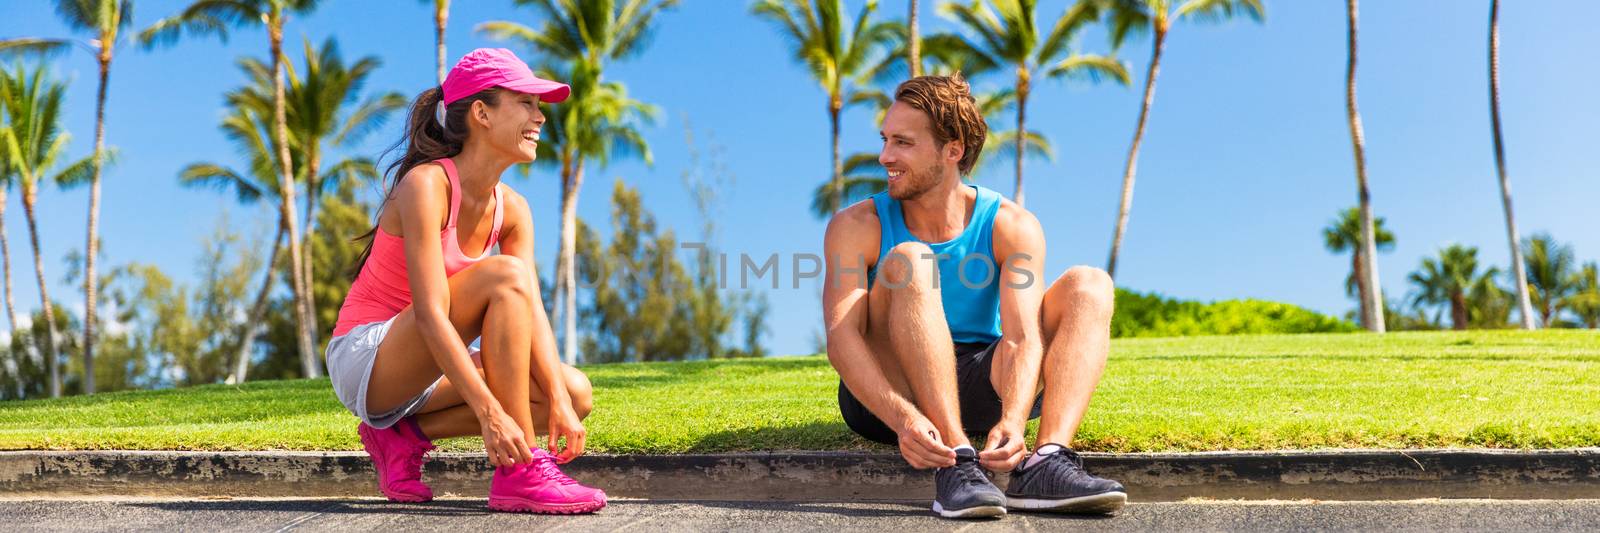 Runners couple tying running shoes to run banner. Runner woman and athlete man lacing shoe laces at park. Healthy lifestyle jogging motivation, happy healthy people. Horizontal landscape crop by Maridav